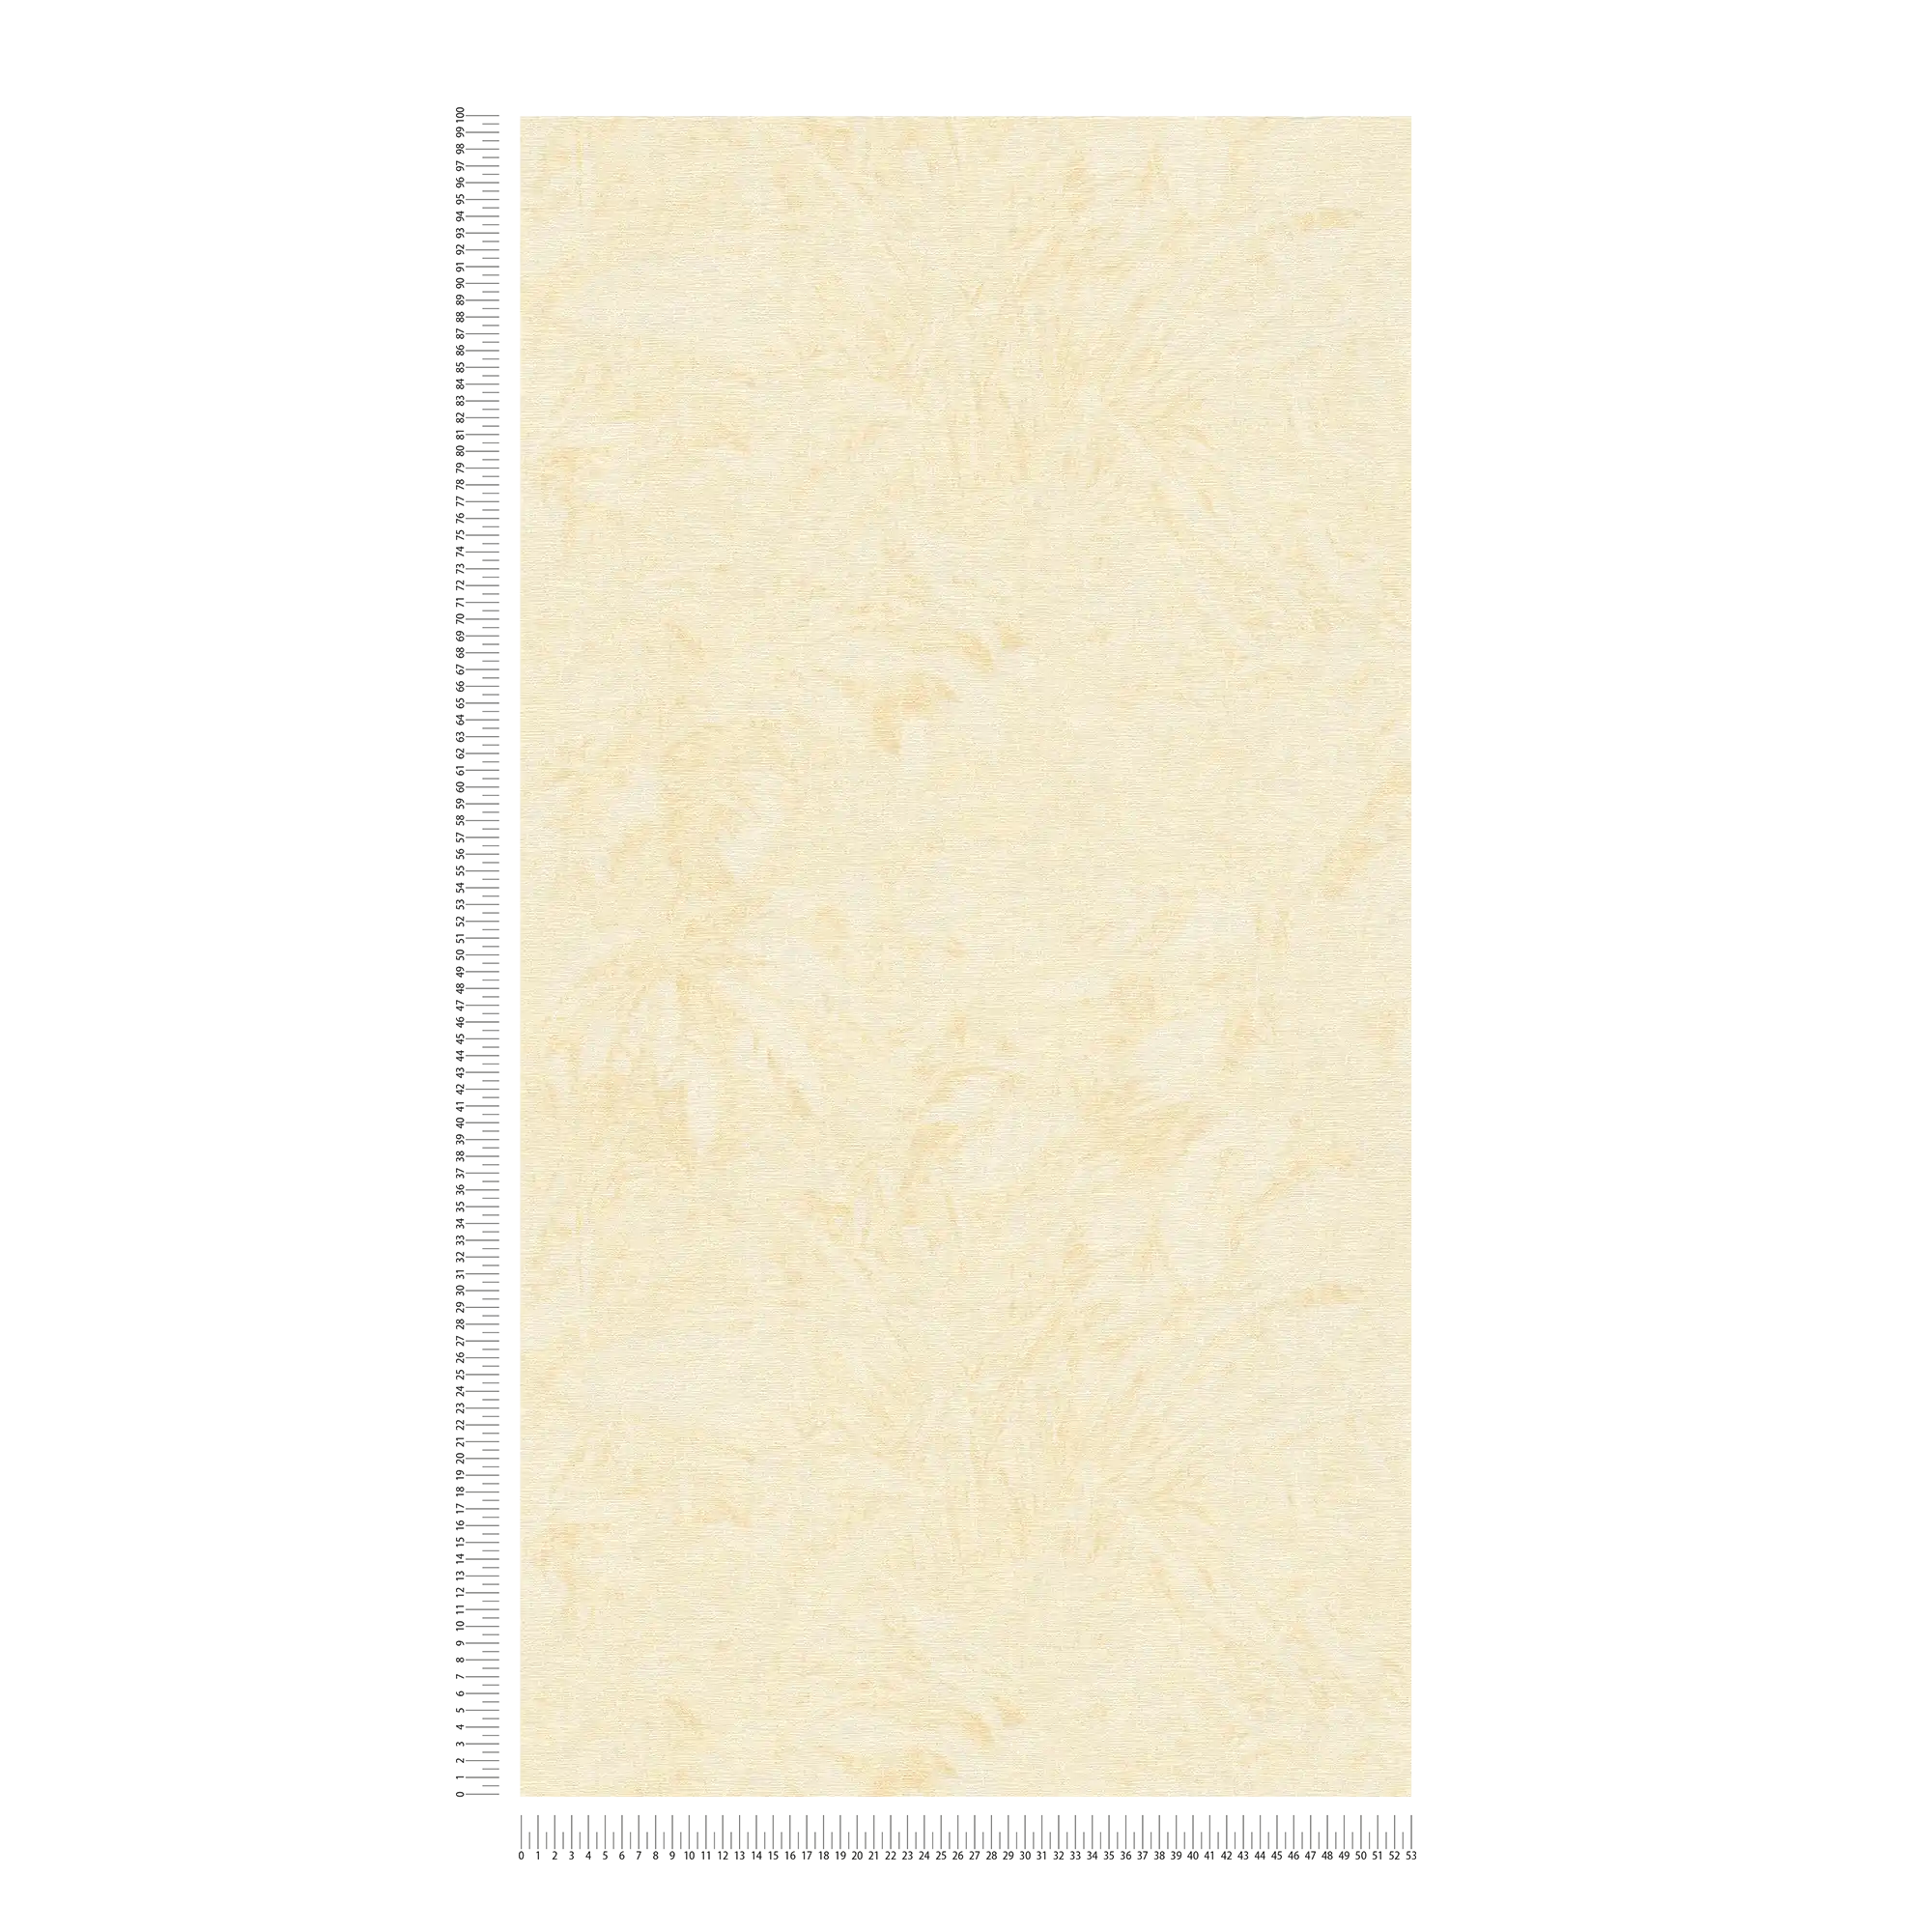             Wallpaper with faded leaf pattern in jungle look - beige, yellow, gold
        